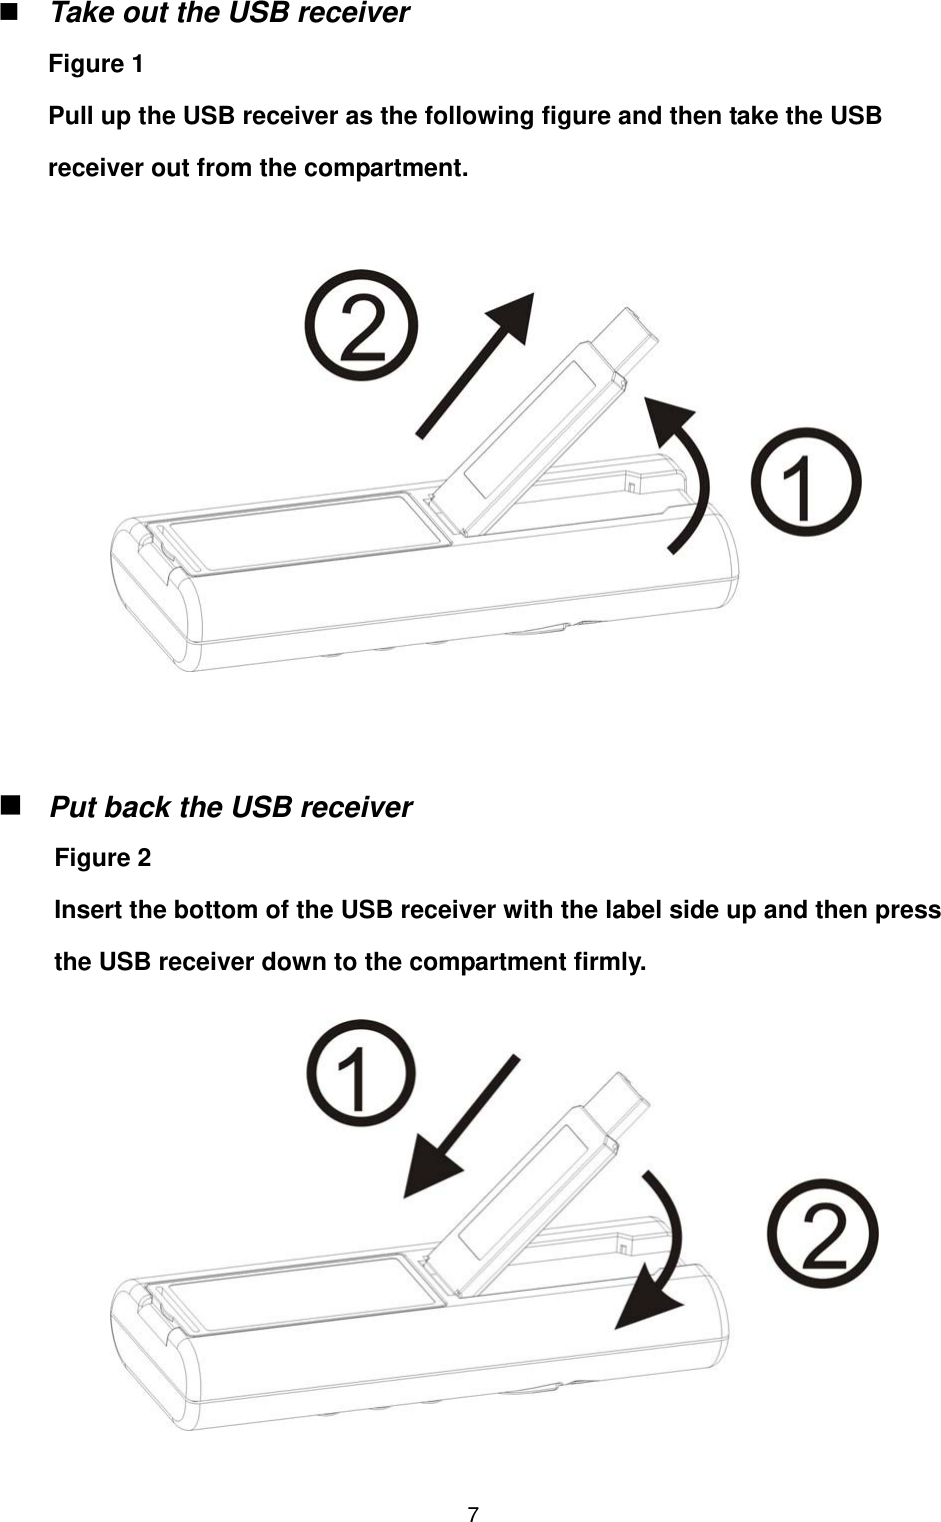   7 Take out the USB receiver  Figure 1 Pull up the USB receiver as the following figure and then take the USB receiver out from the compartment.                  Put back the USB receiver  Figure 2 Insert the bottom of the USB receiver with the label side up and then press the USB receiver down to the compartment firmly.         